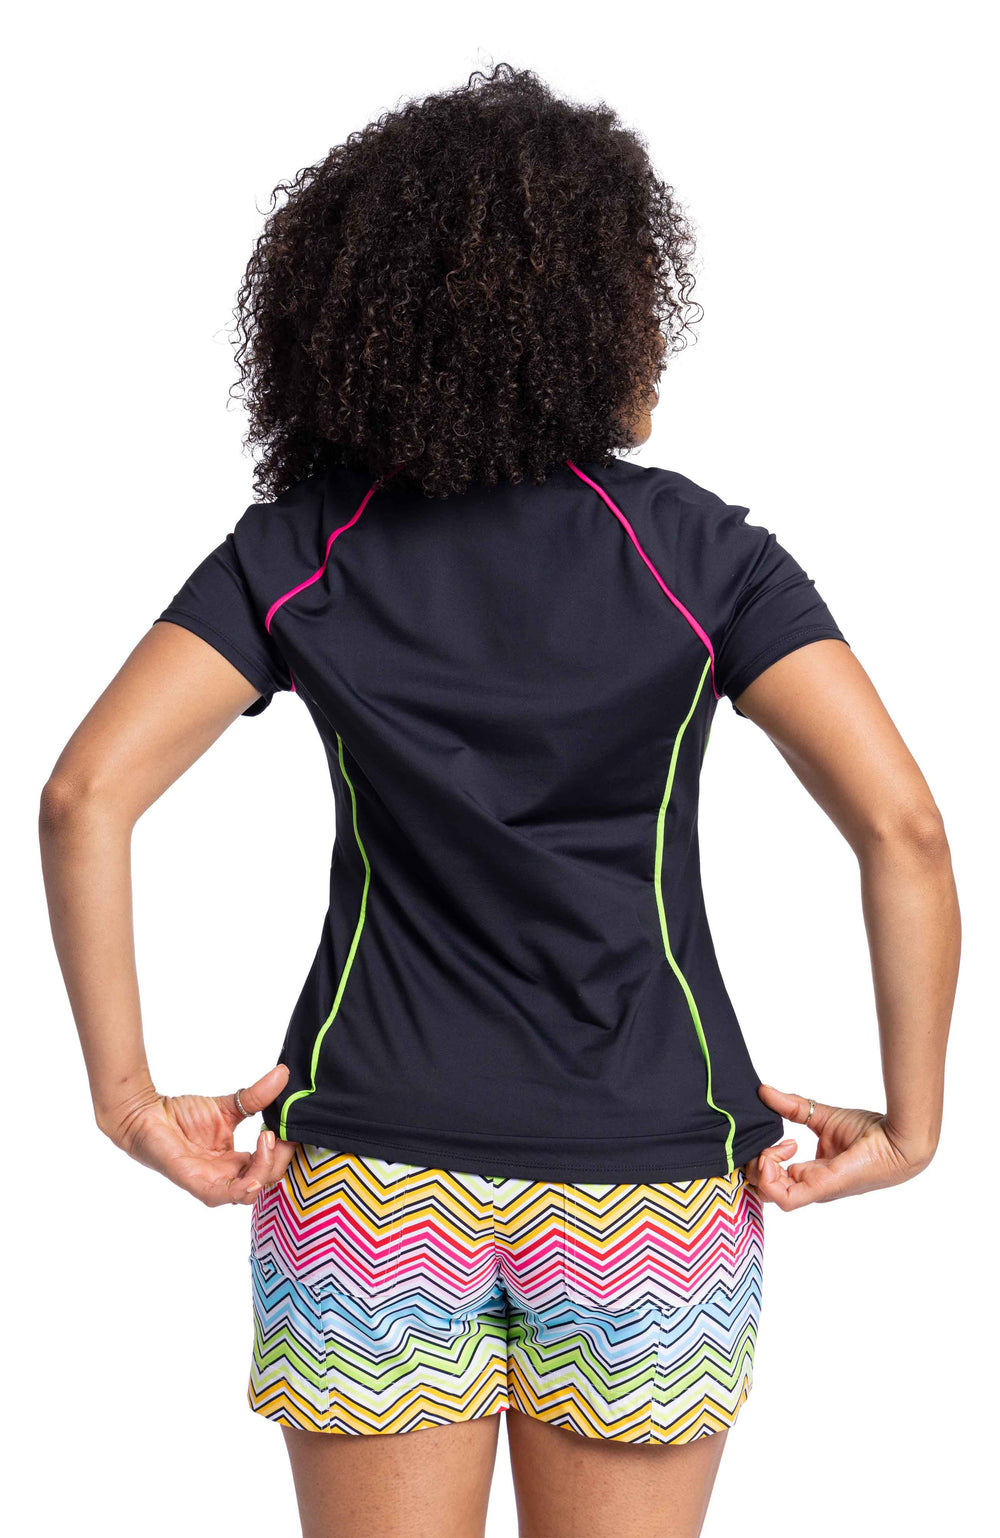 Back side of woman wearing black golf shirt with pink and yellow piping and multicolored golf shorts